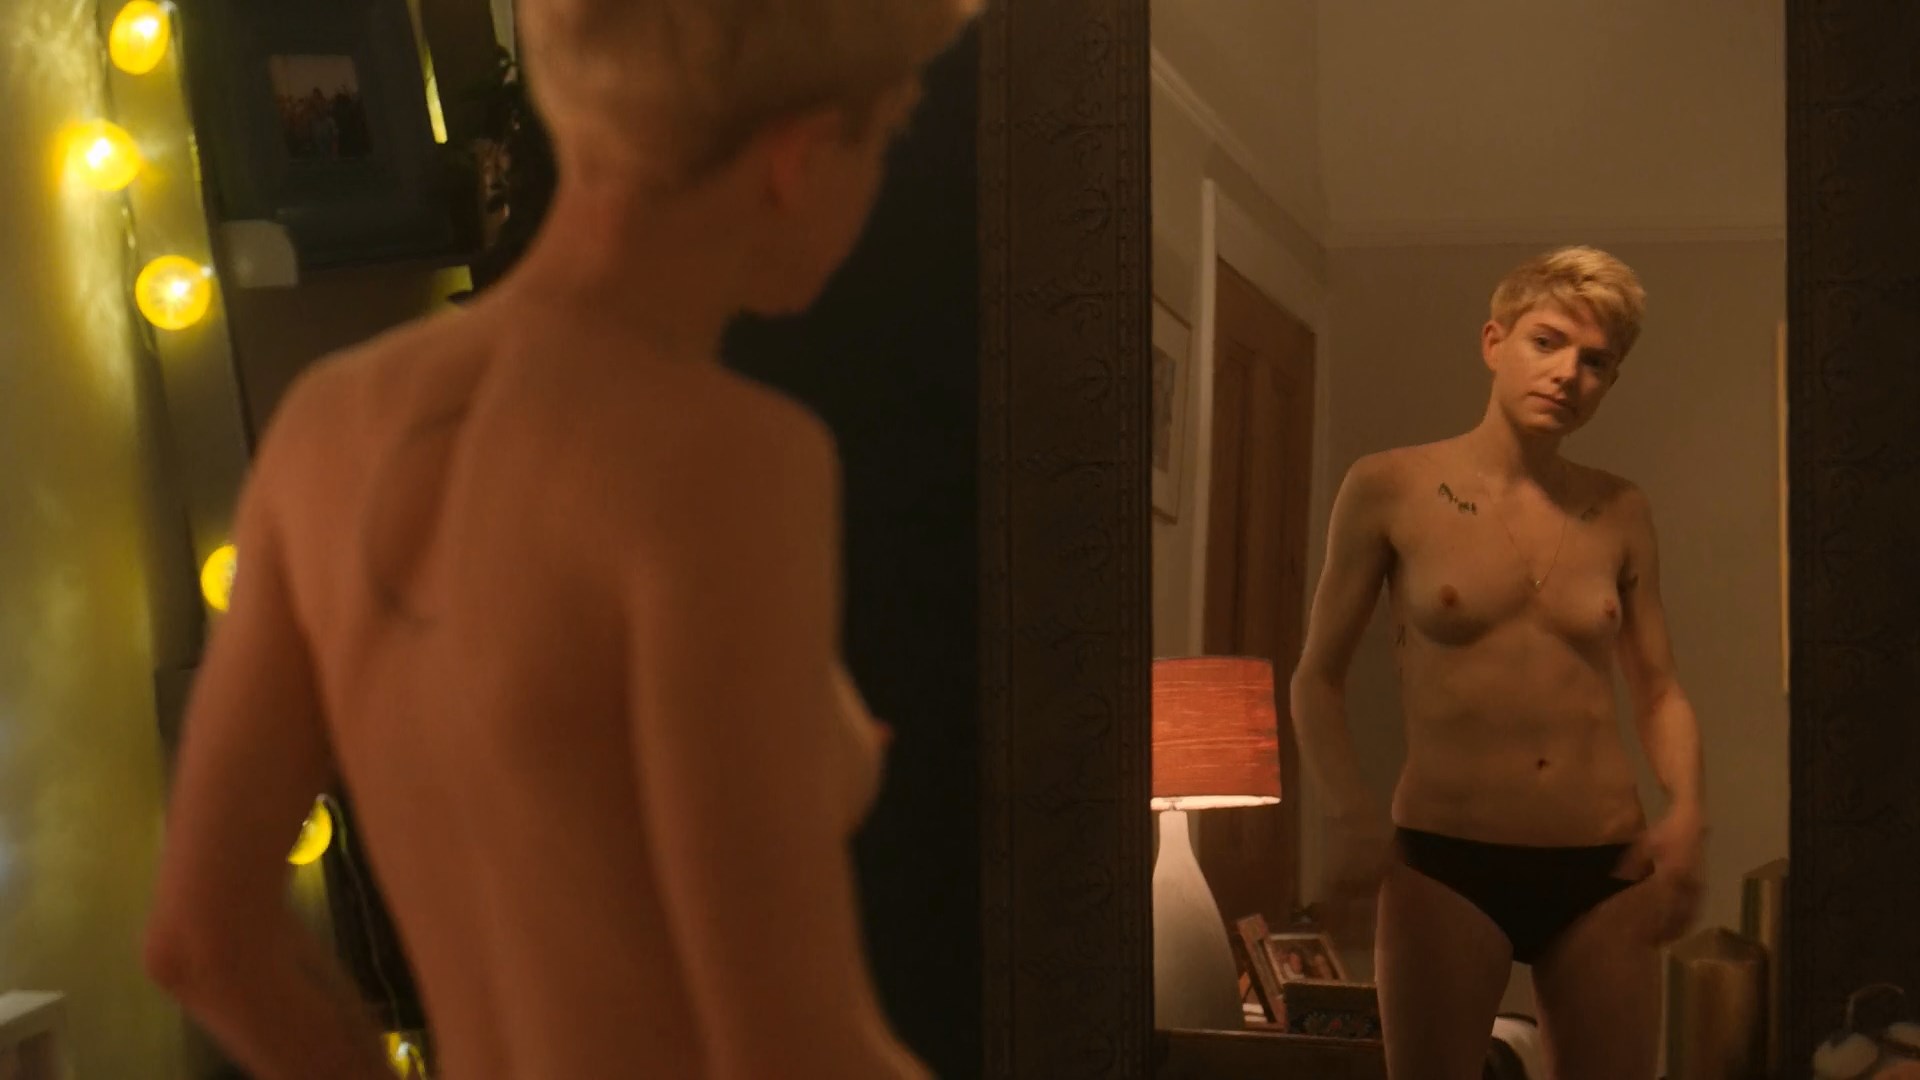 76. Charlotte Ritchie nude, Charlotte Ritchie naked, Charlotte Ritc...